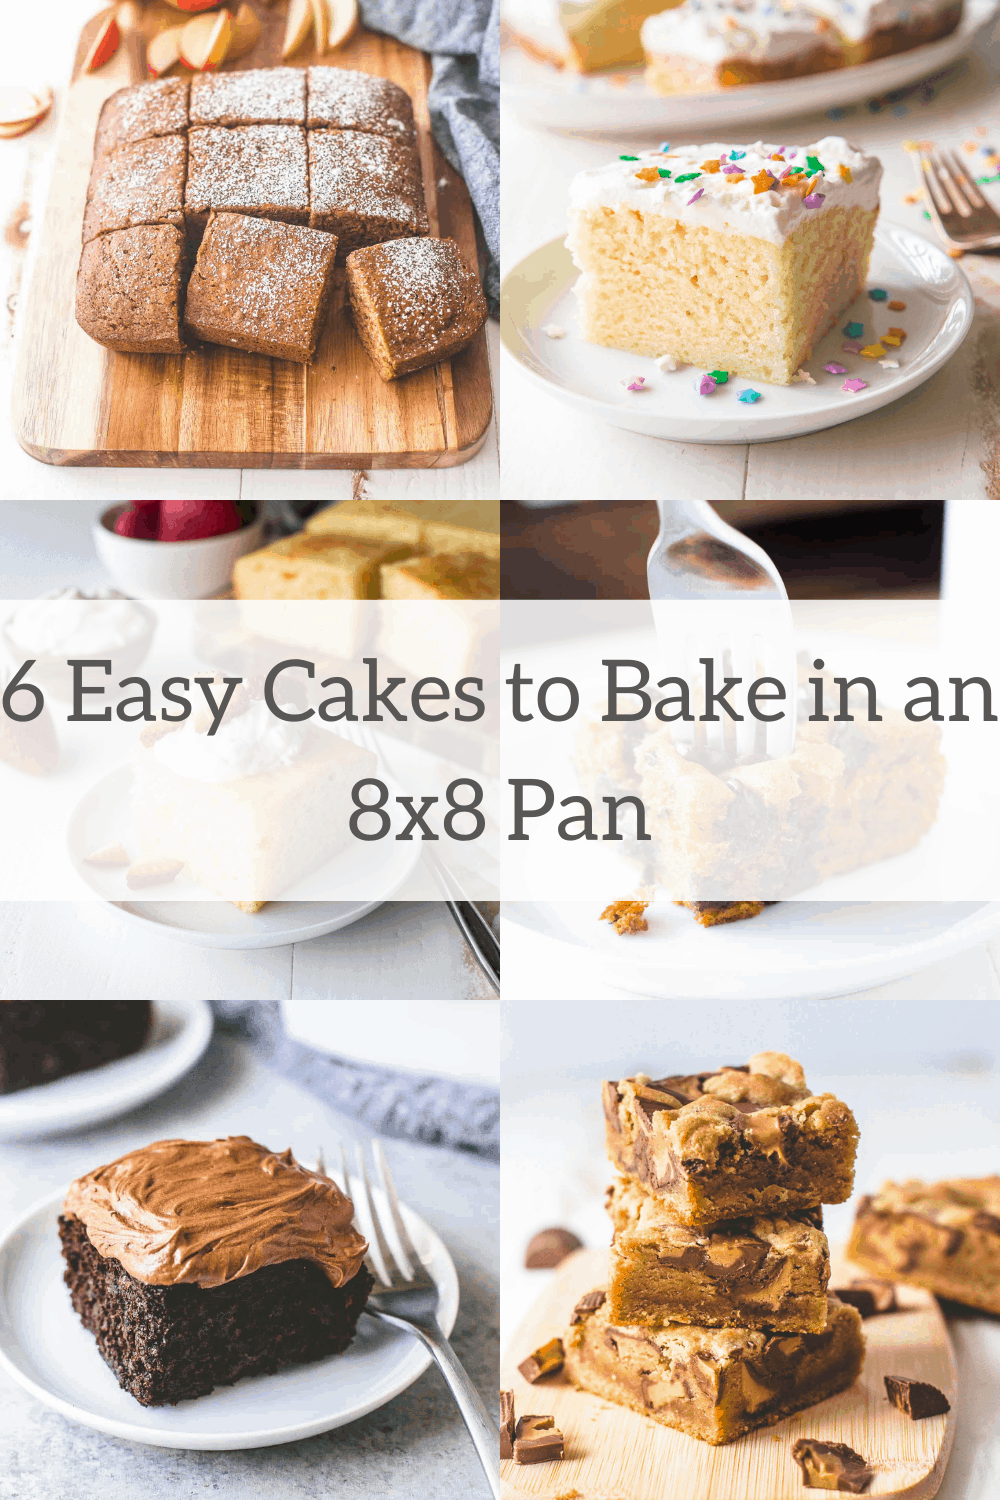 6 Easy Cakes to bake in an 8x8 pan